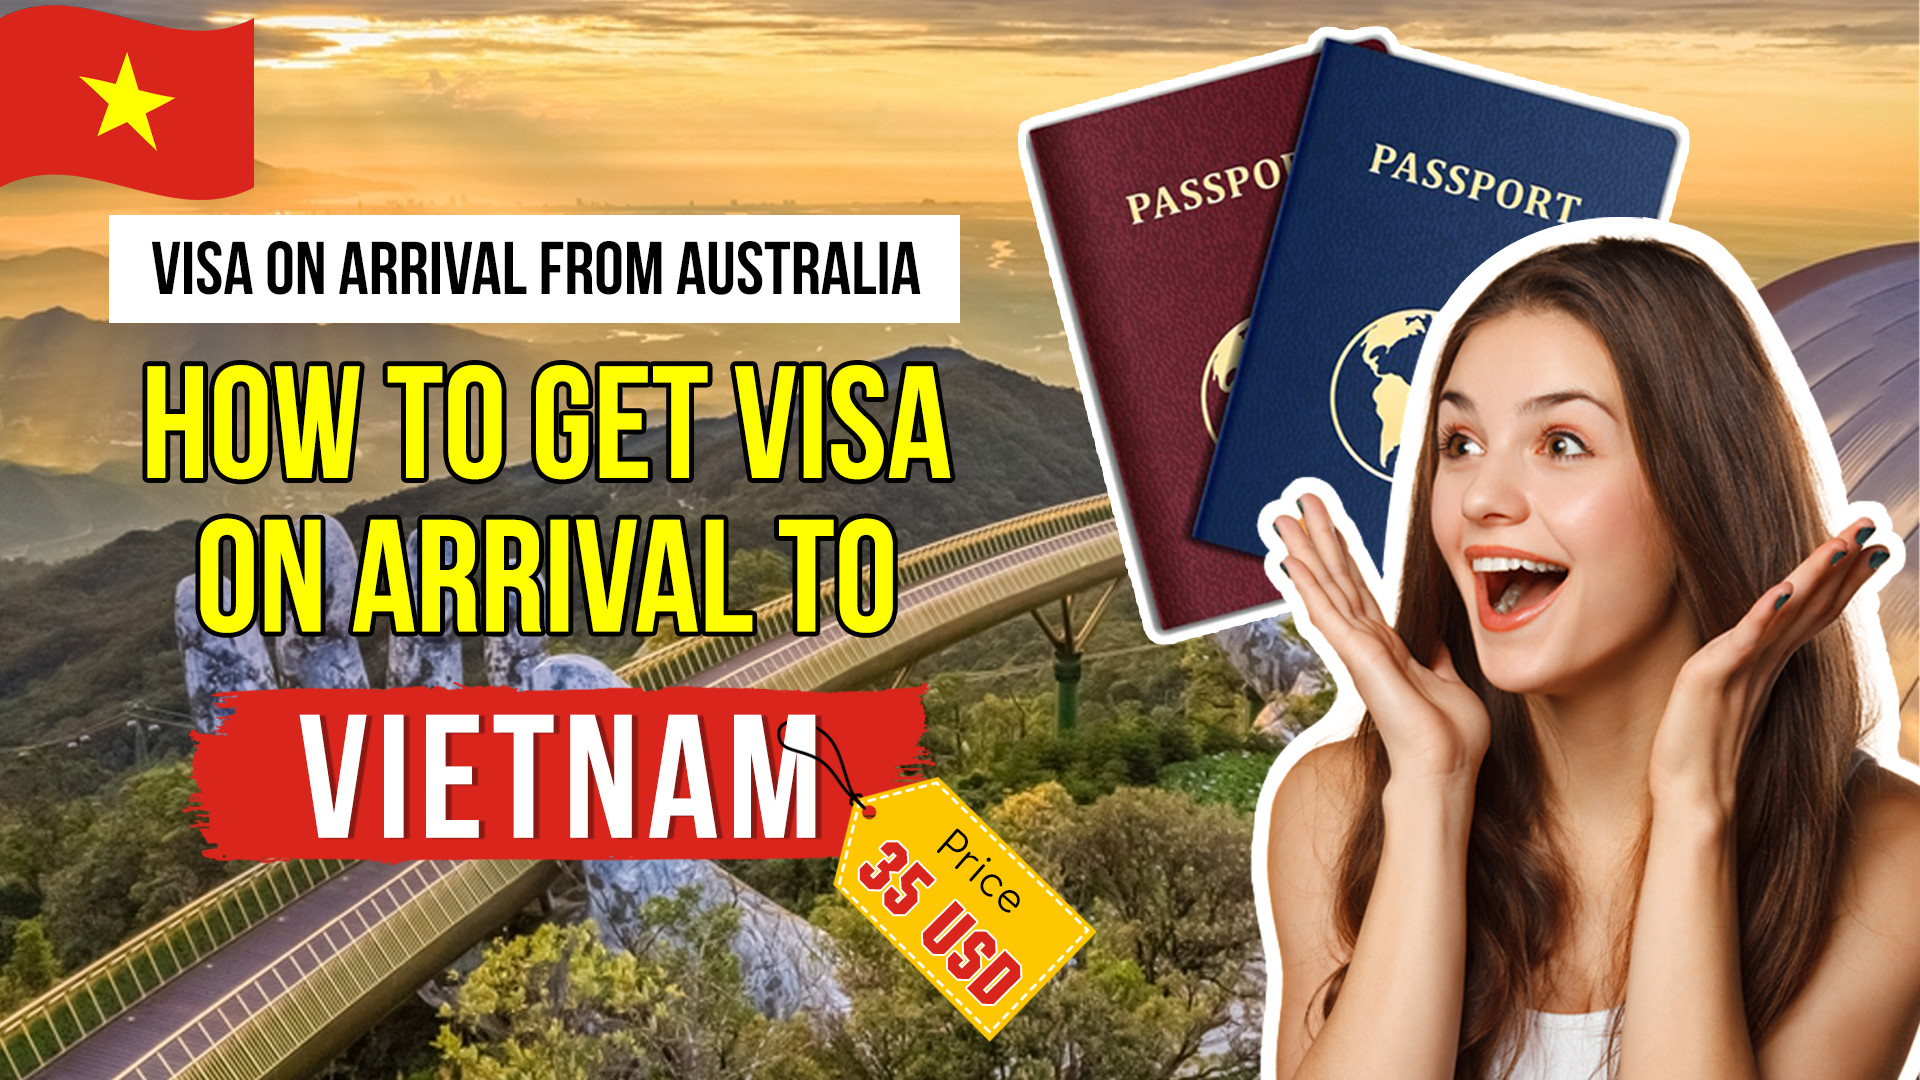 Visa Extension or Visa Run - Which is better?